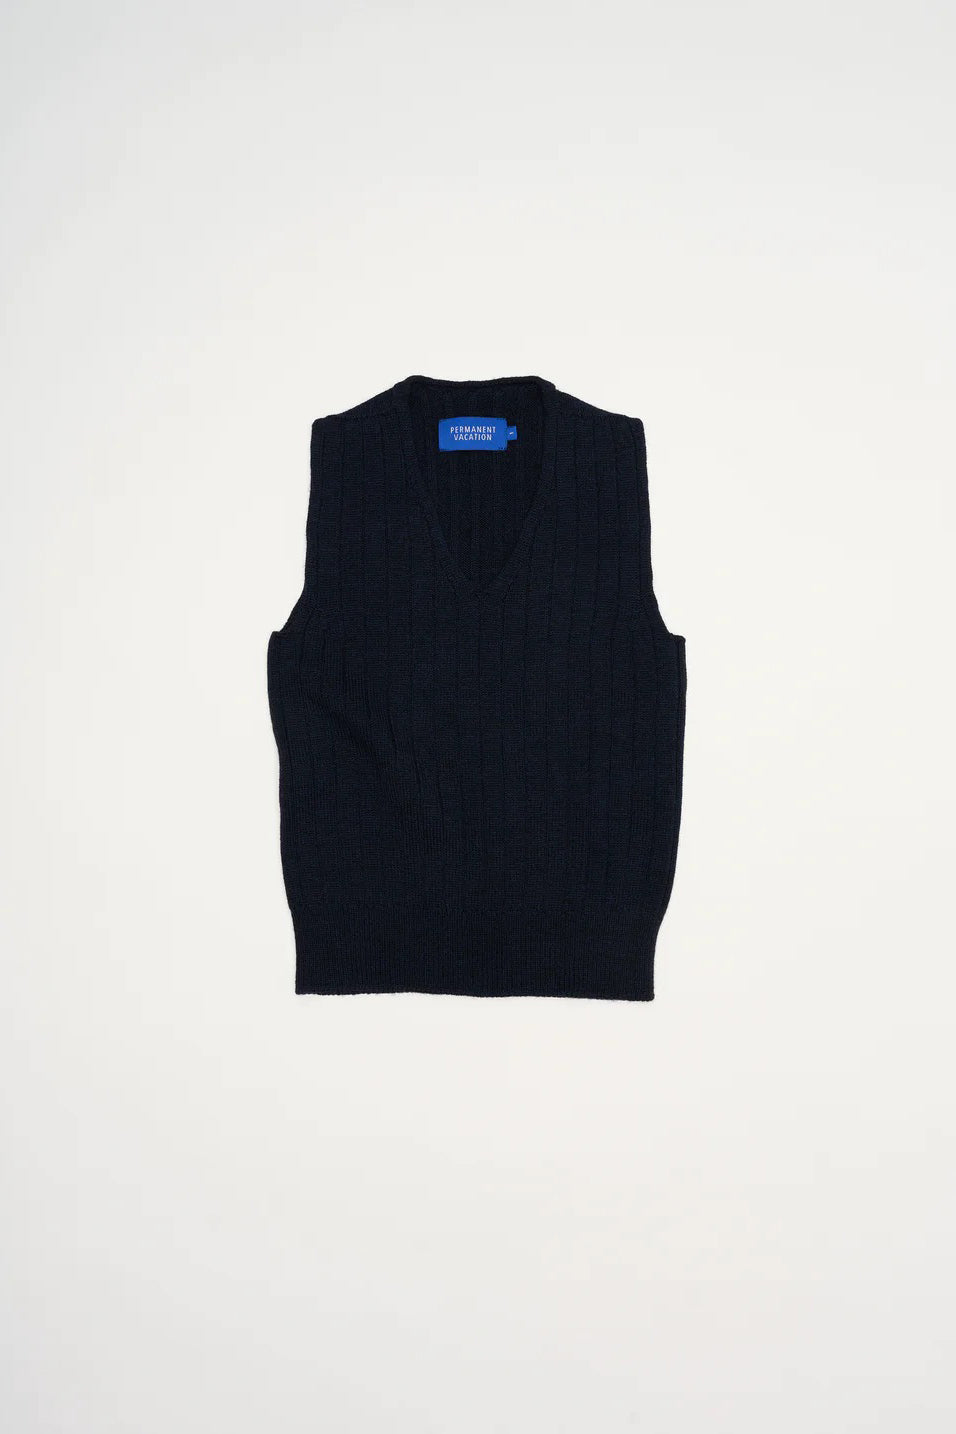 PV Echo Knitted Vest // Ink